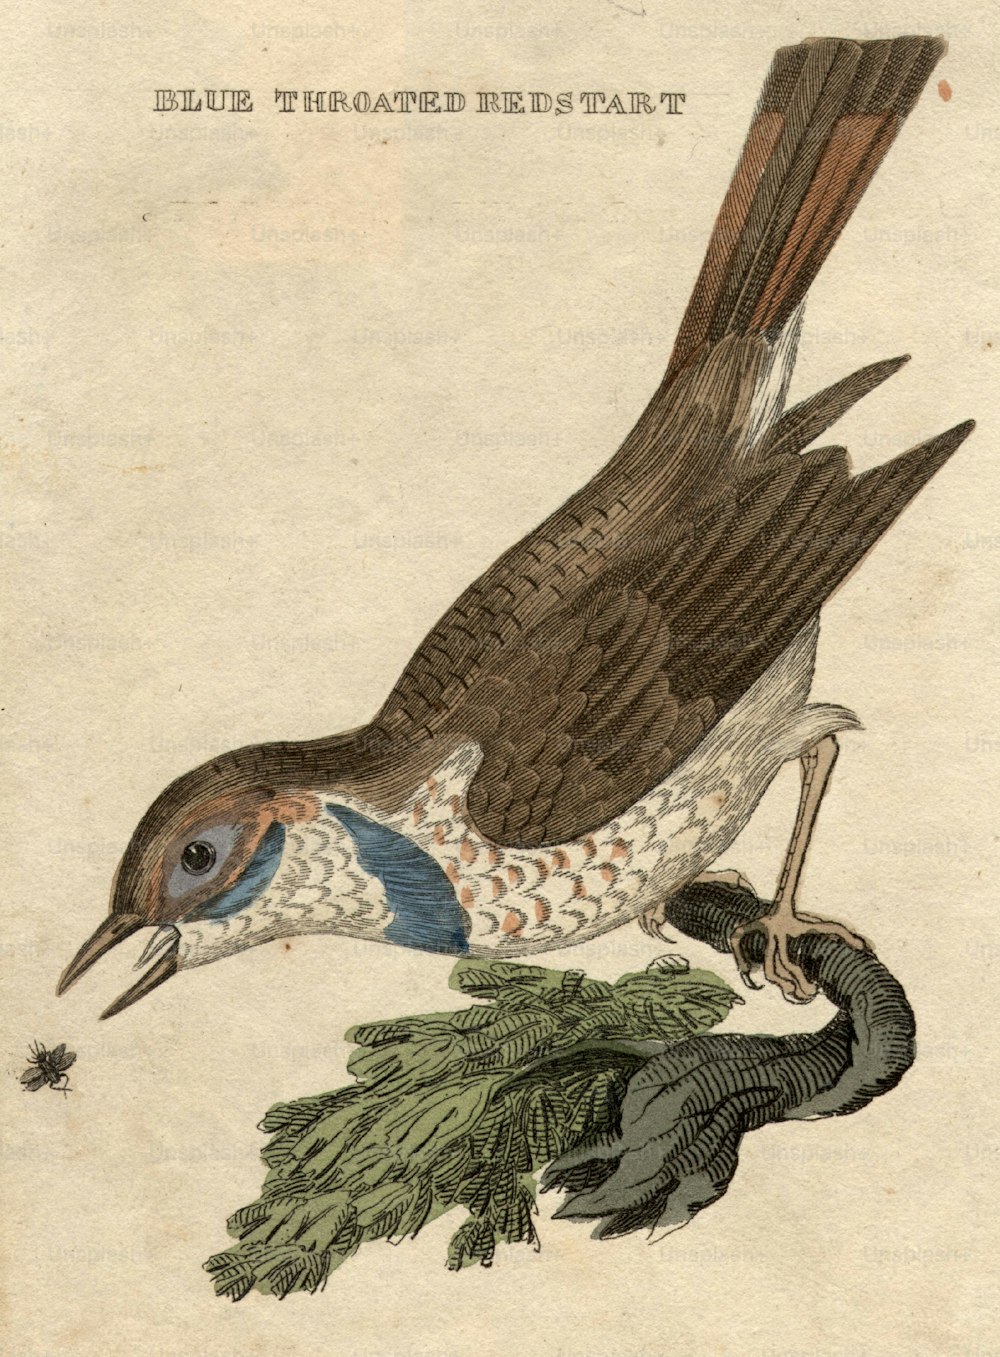 circa 1800:  The Blue-Throated Redstart catching a fly.  (Photo by Hulton Archive/Getty Images)